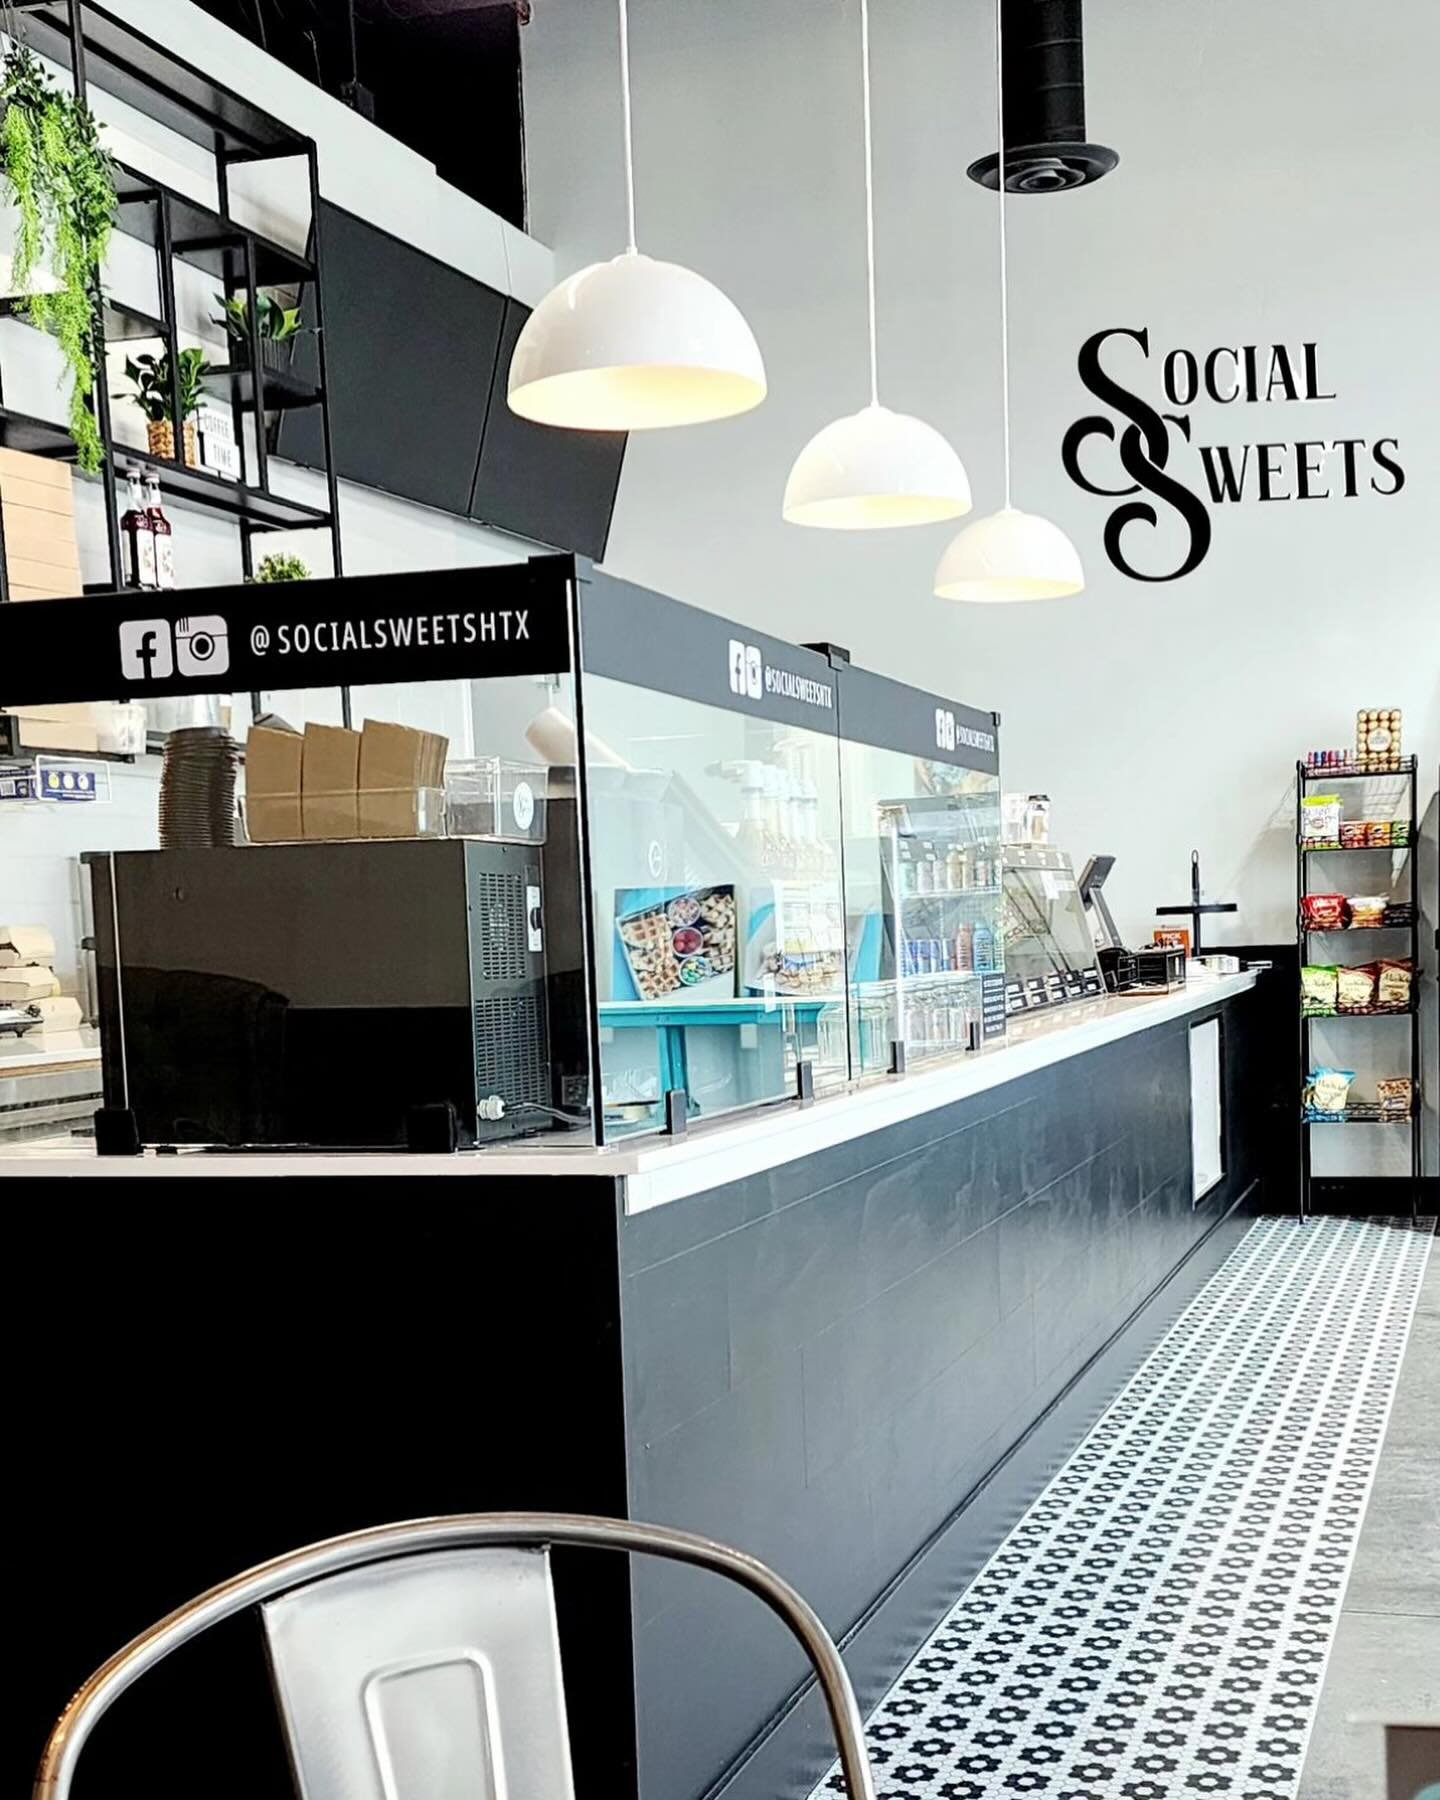 🍦🧇Social Sweets is NOW OPEN! Indulge in a world of sweetness at our Ice Cream, Coffee, Waffles, and Pastries shop! 

Make sure to tag a friend in the comments and give them a follow socialsweetshtx